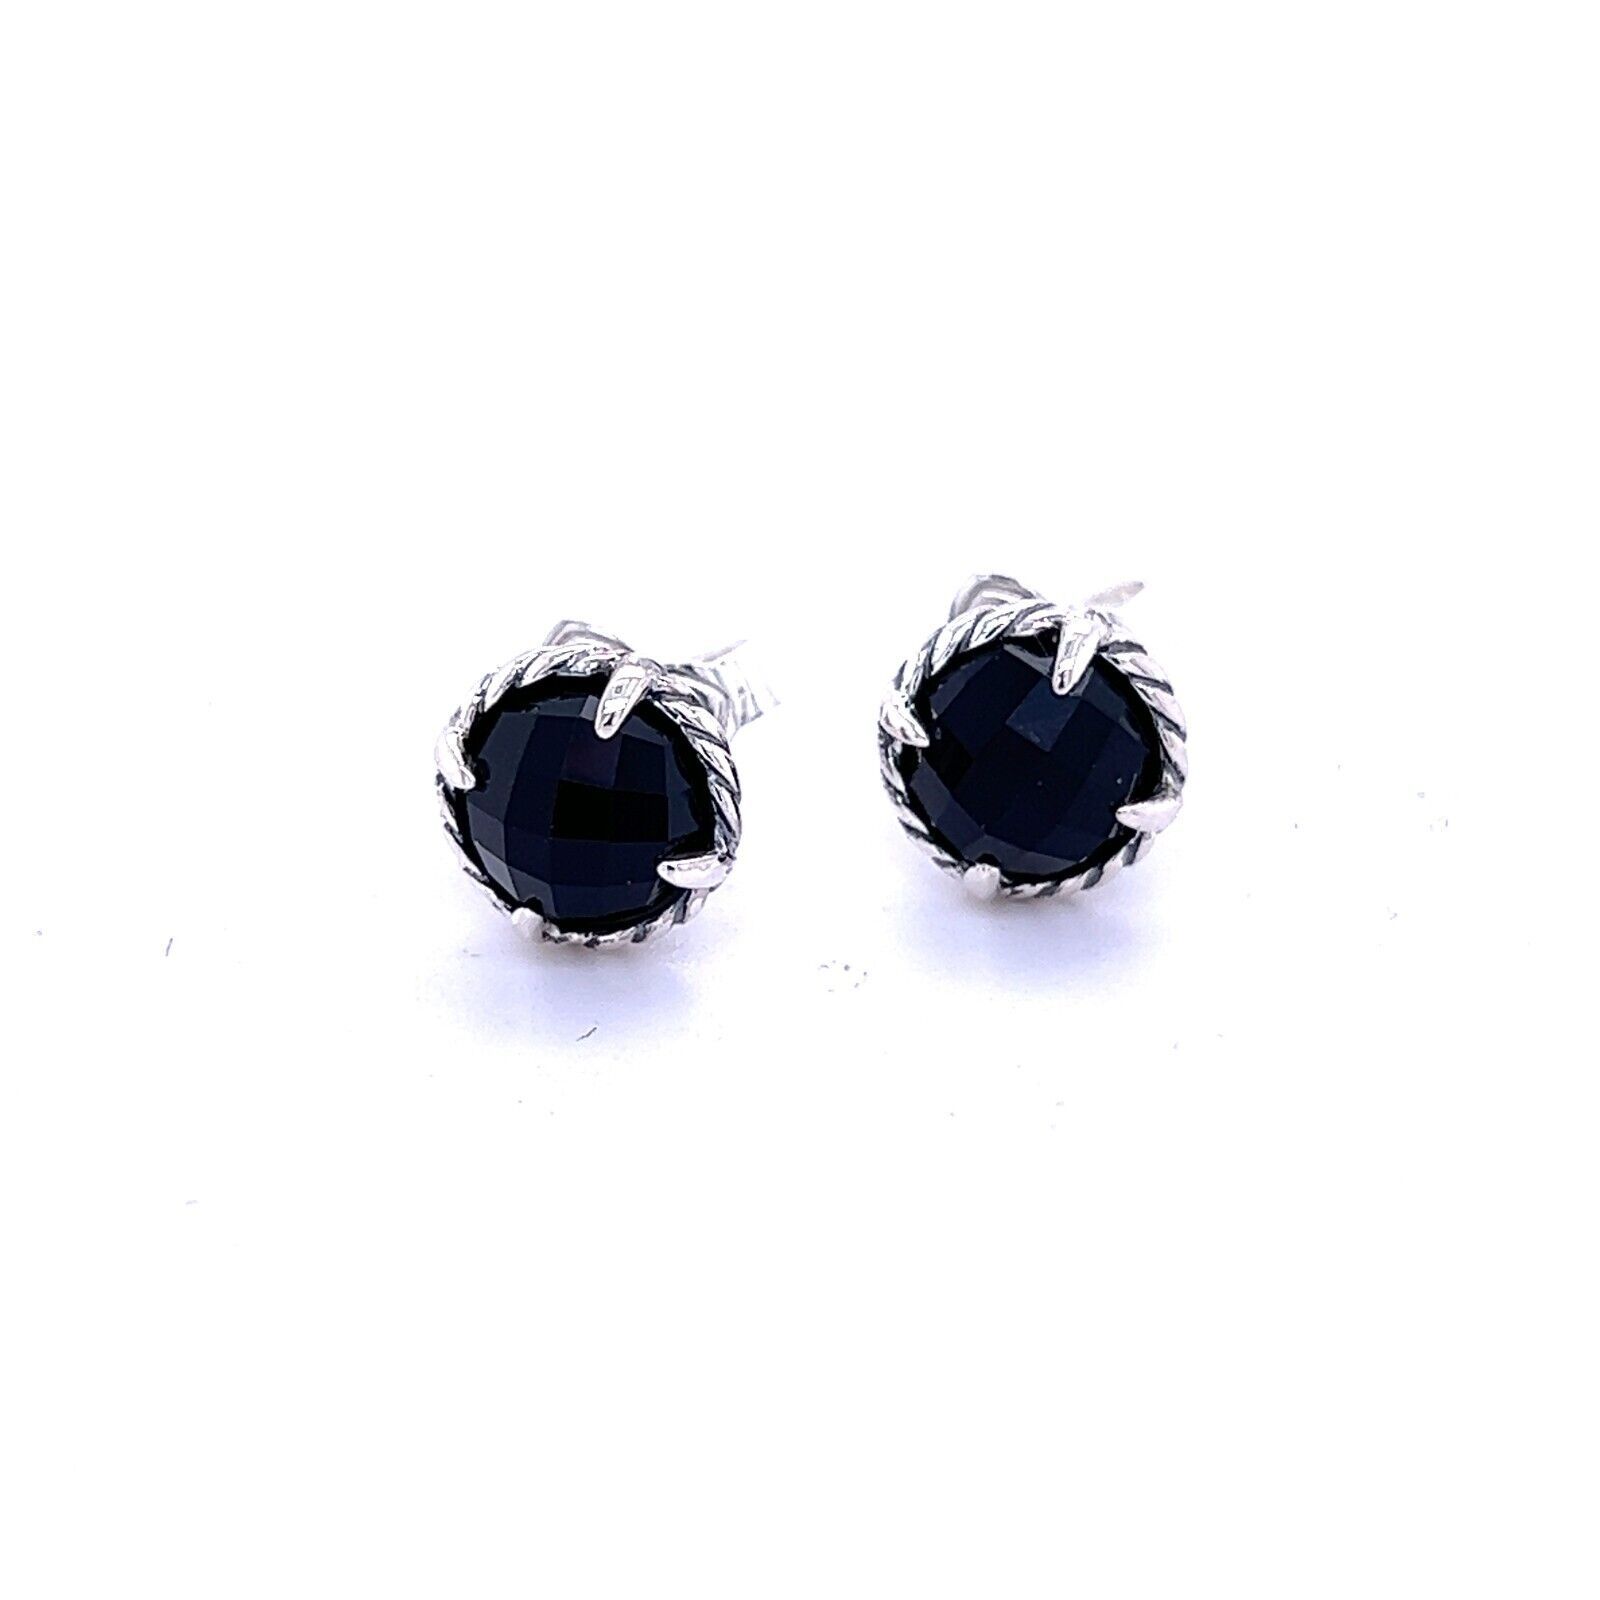 Primary image for David Yurman Authentic Estate Black Onyx Chantelaine Stud Earrings Silver DY355